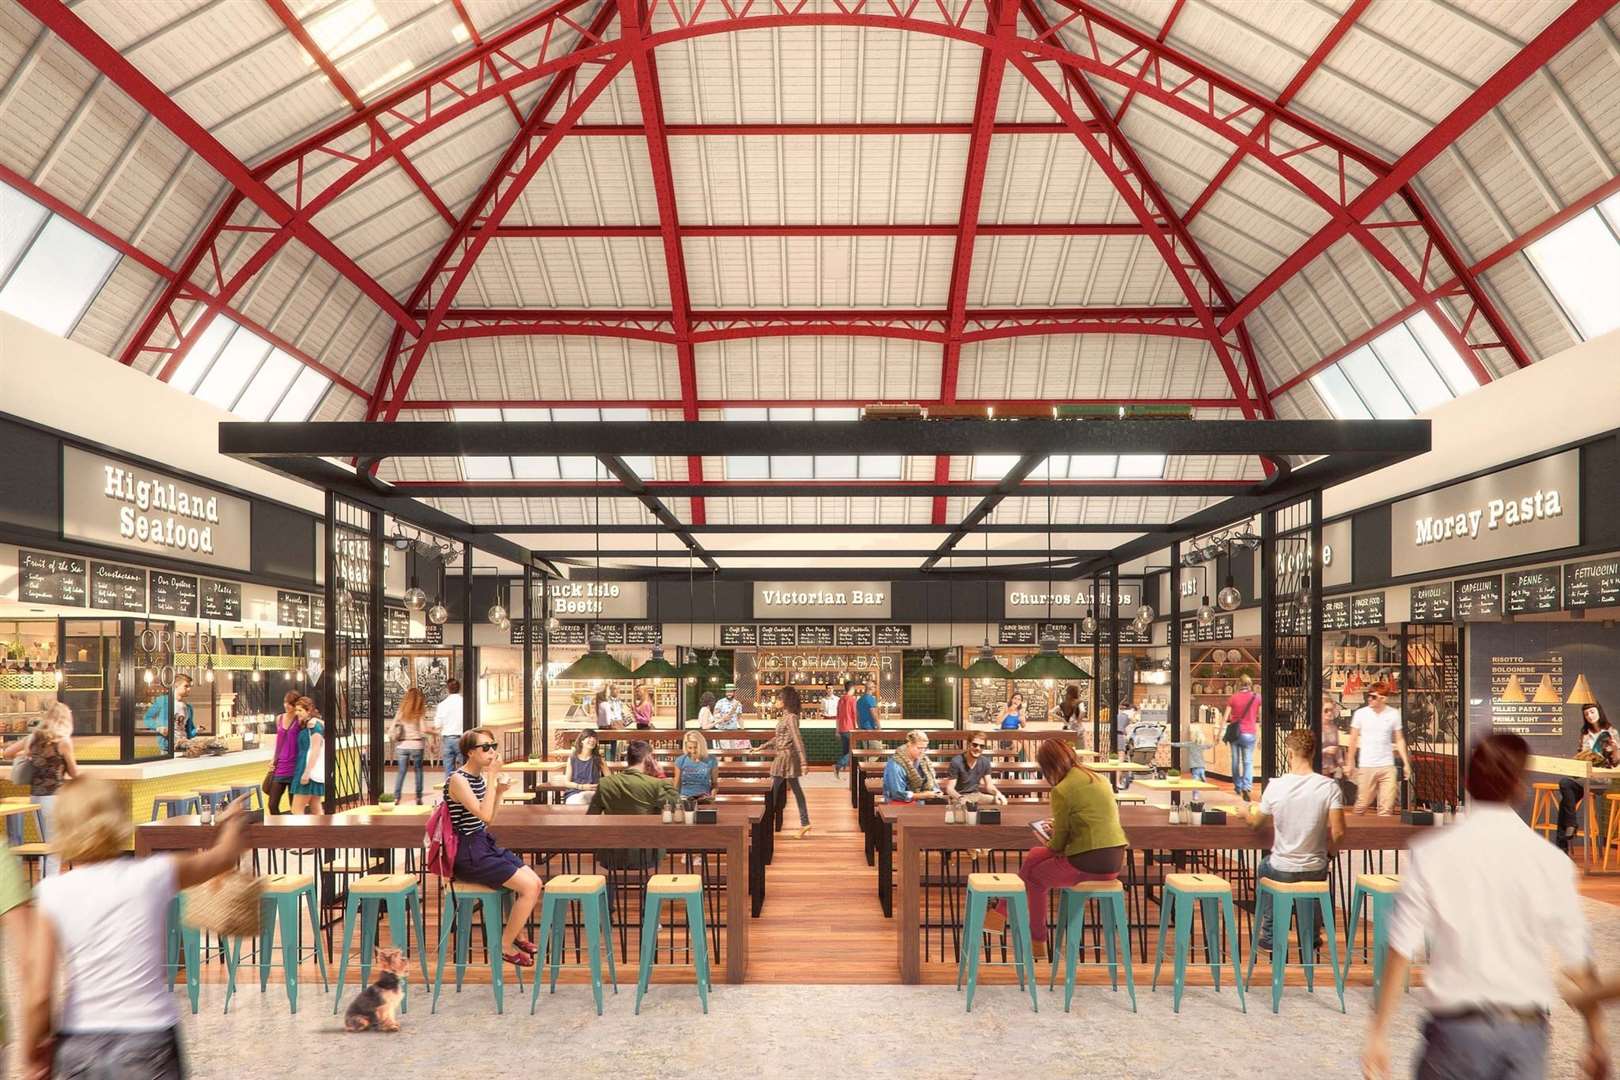 An artist's impression of the revamped Victorian Market.